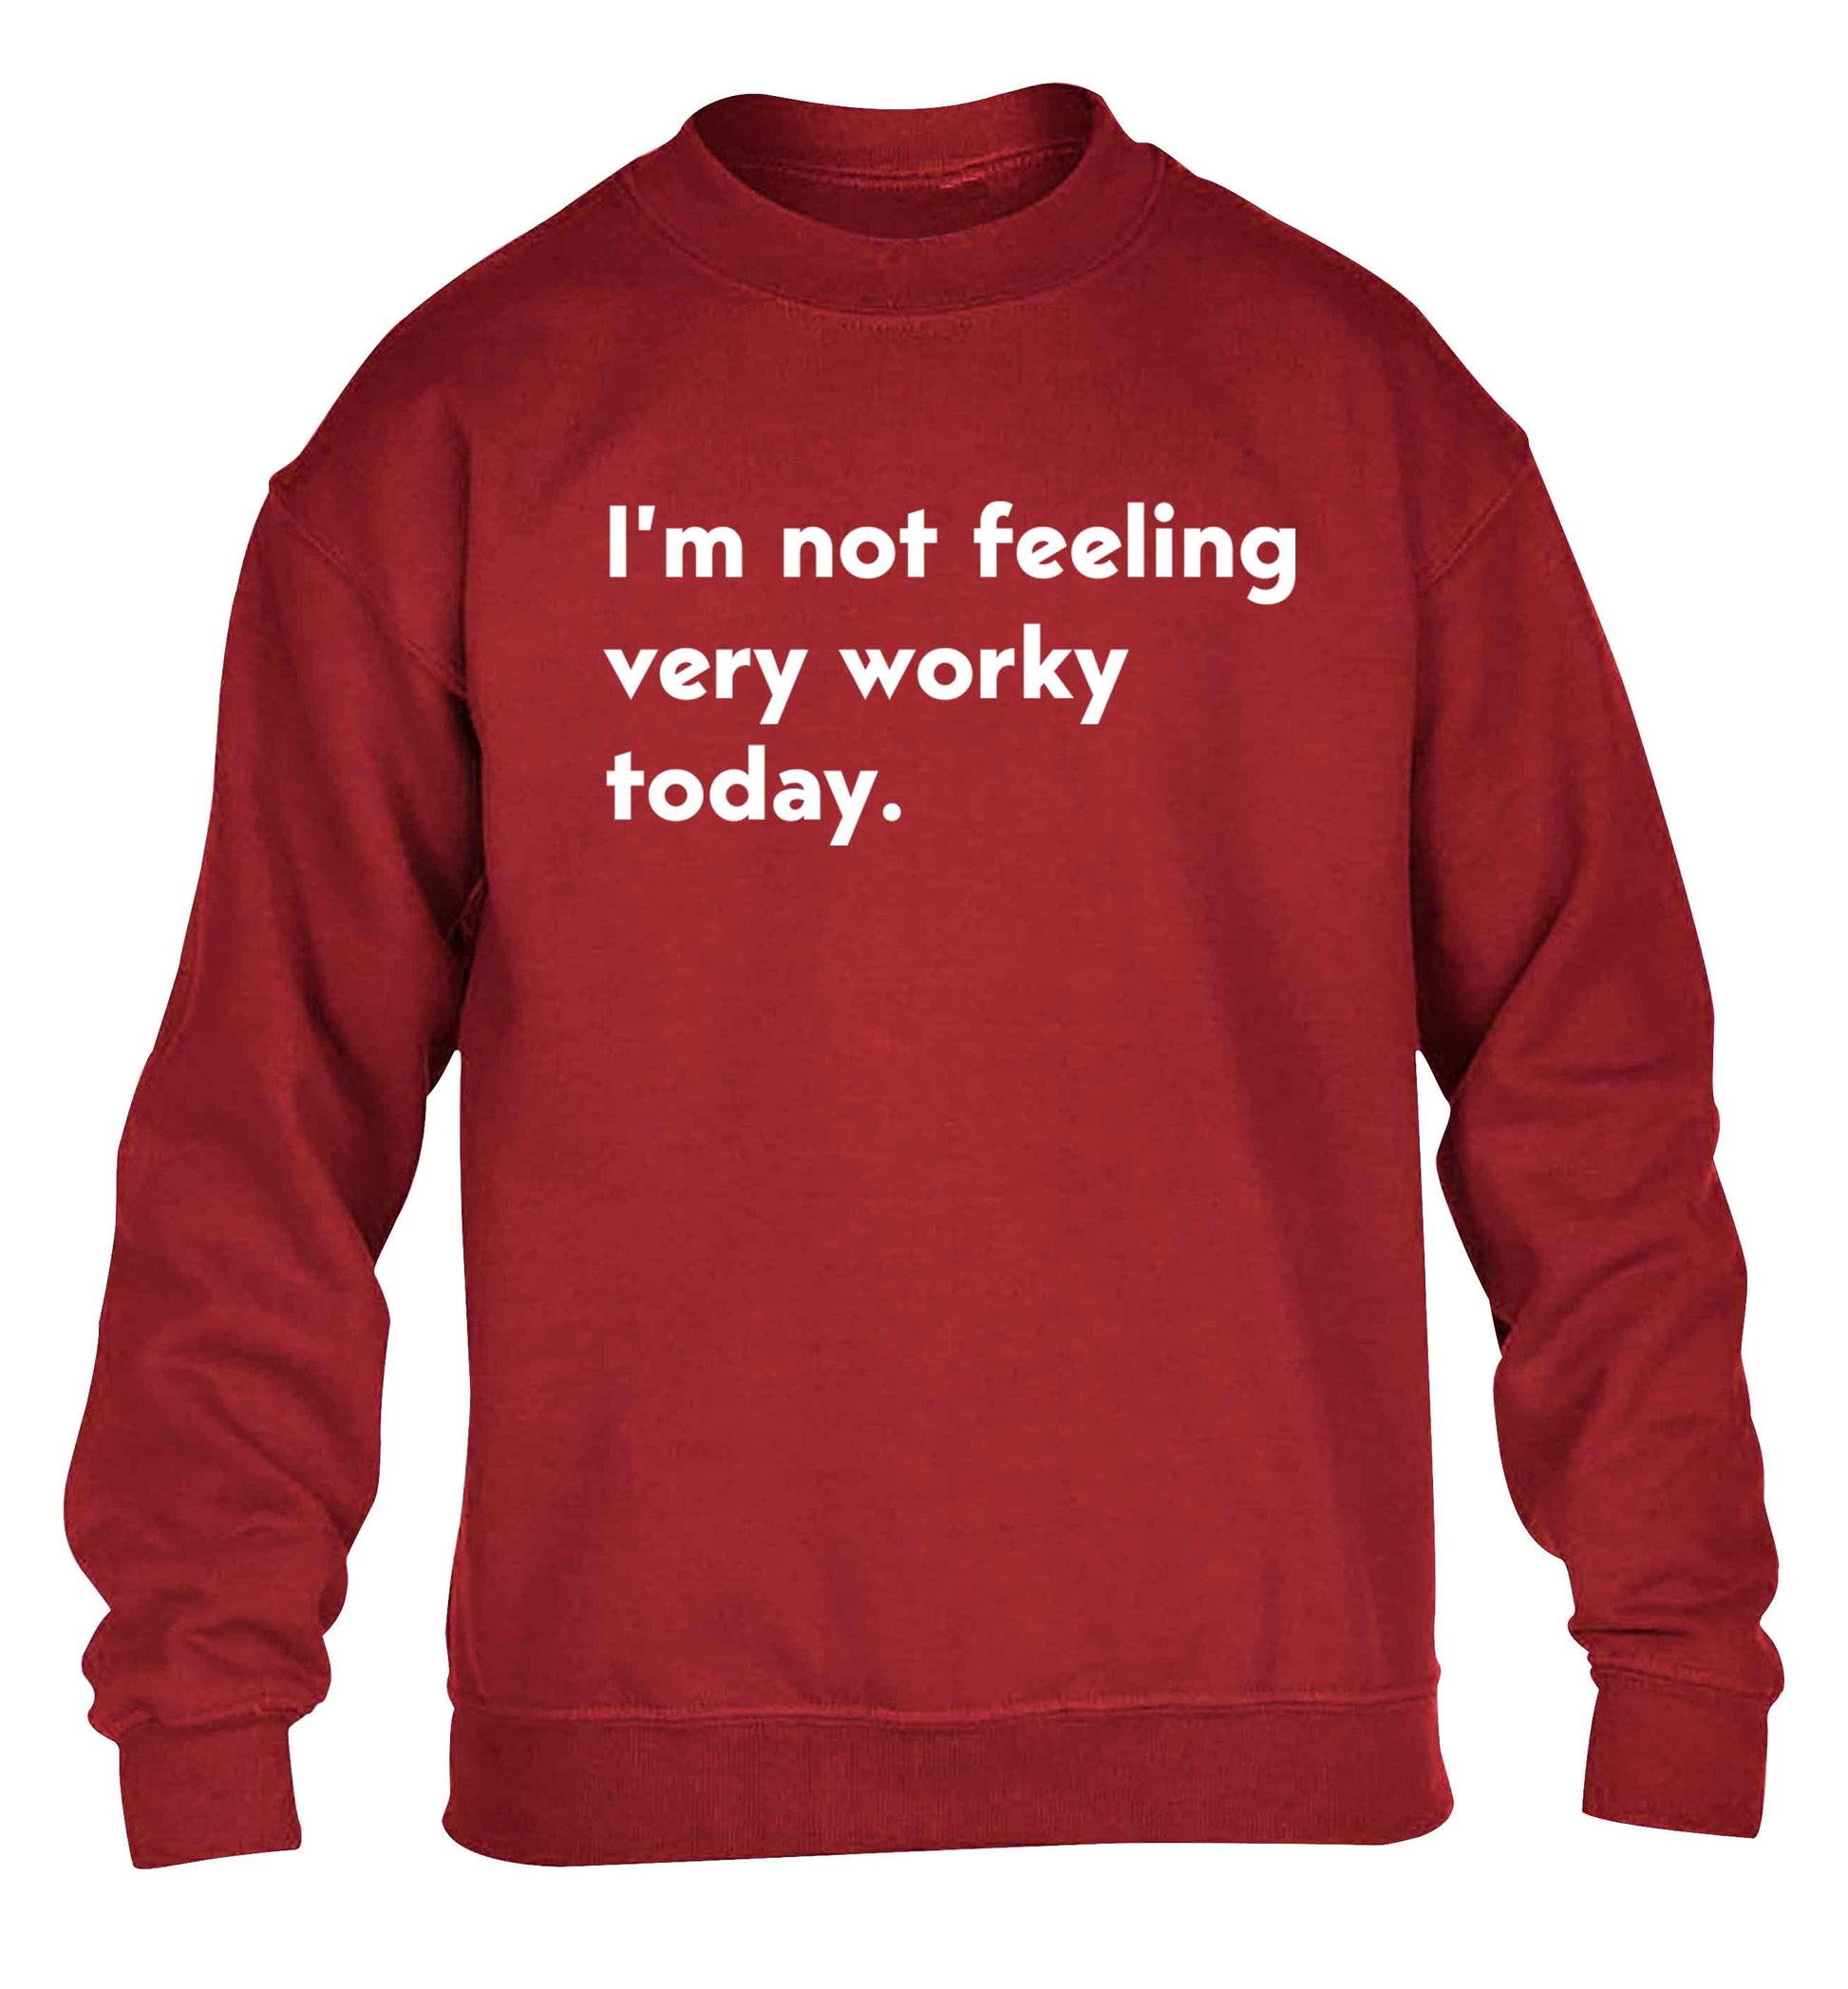 I'm not feeling very worky today children's grey sweater 12-13 Years